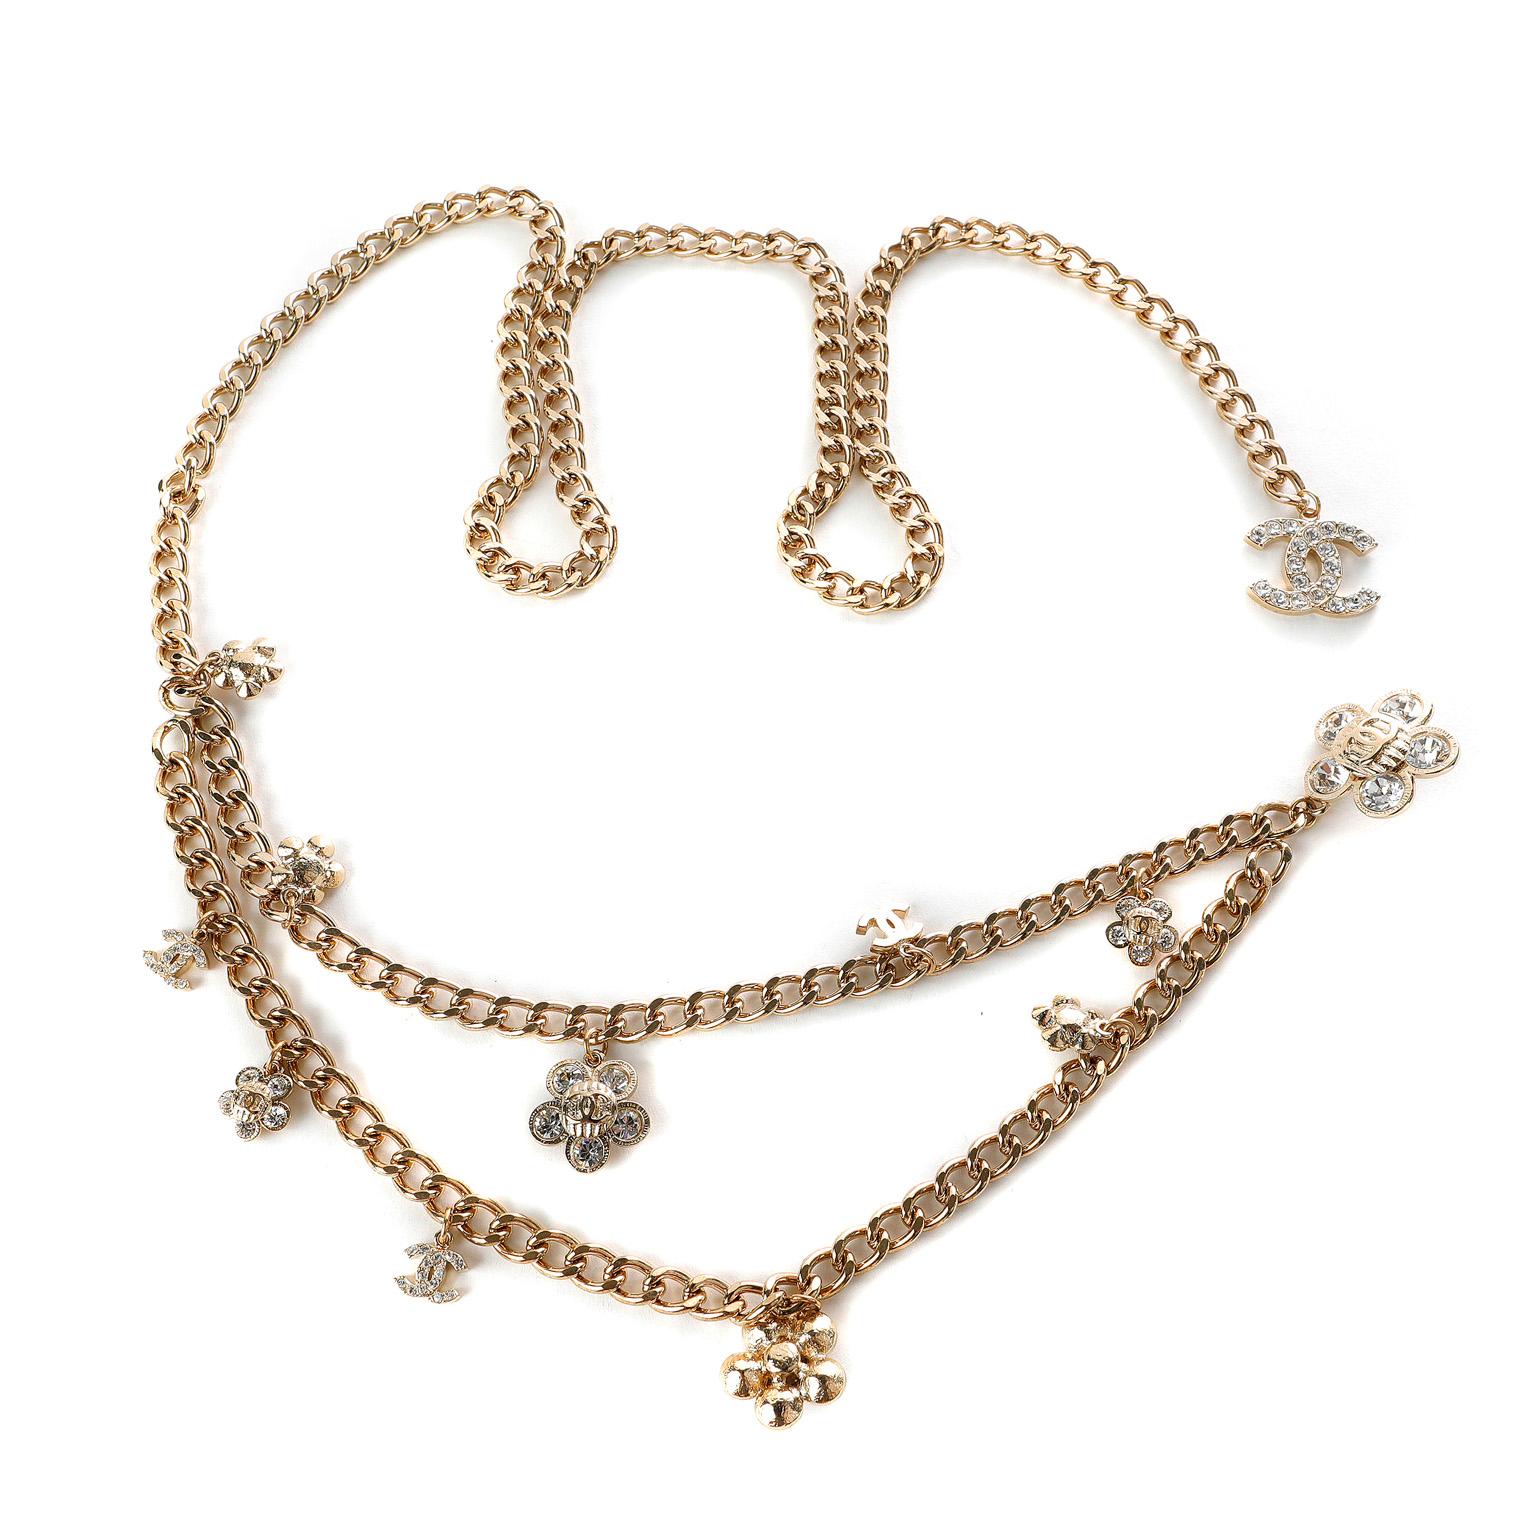 Women's Chanel Gold Chain and Crystal Flower Belt Necklace 